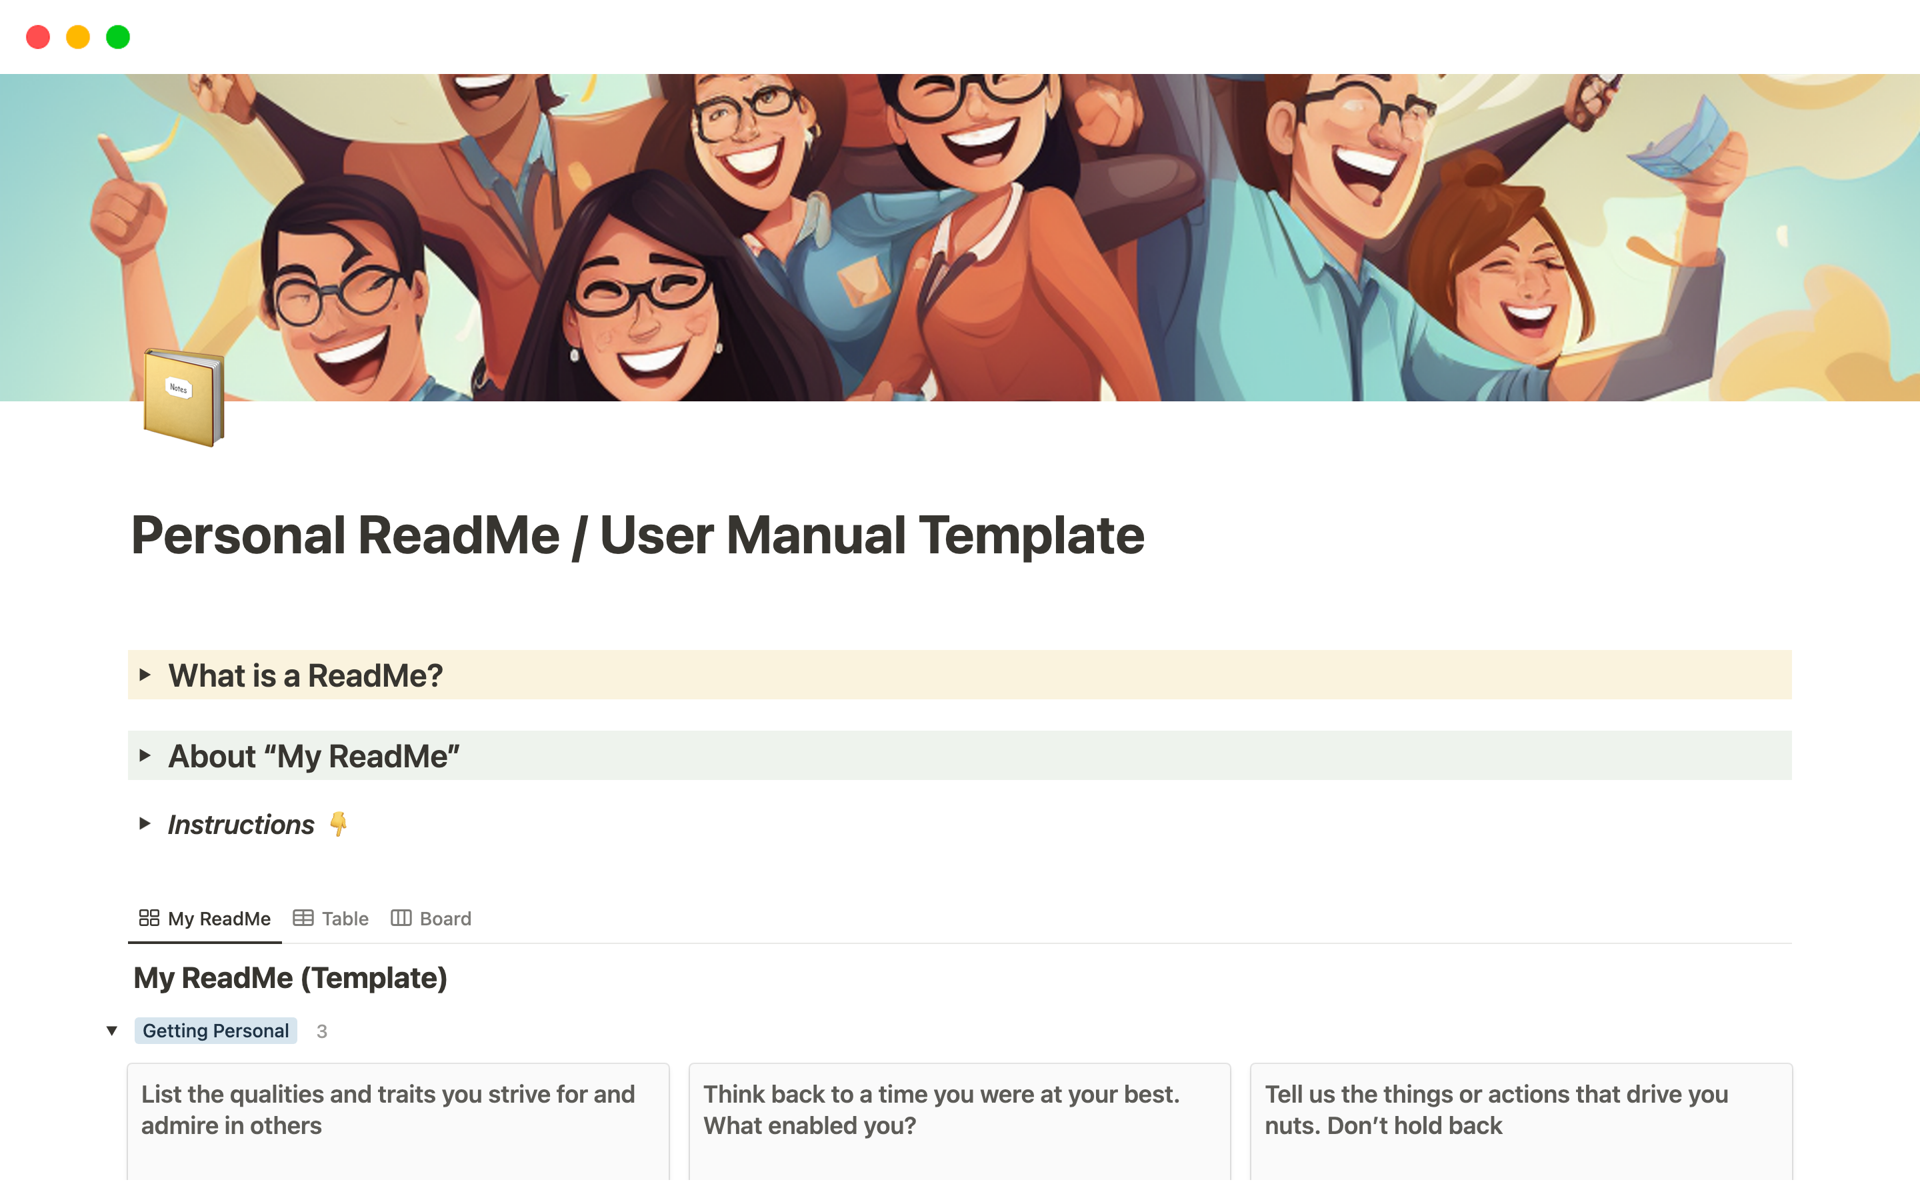 Personal ReadMe or UserManual to help team cohesion